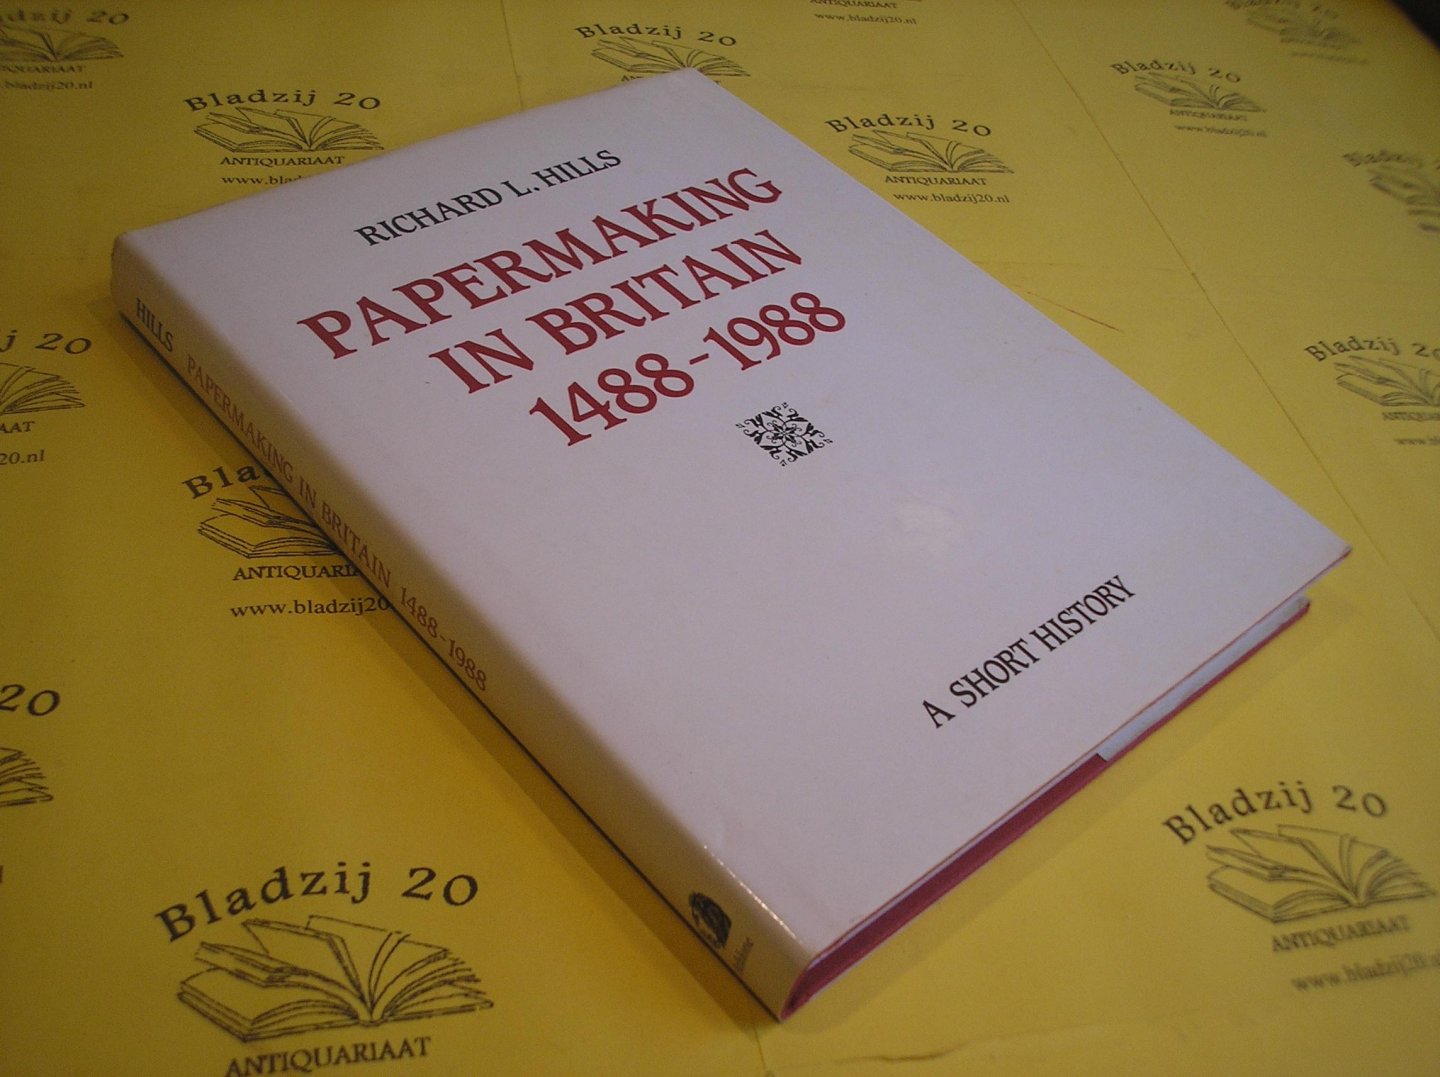 Hills, Richard L. - Papermaking in Britain 1488-1988. A short history.